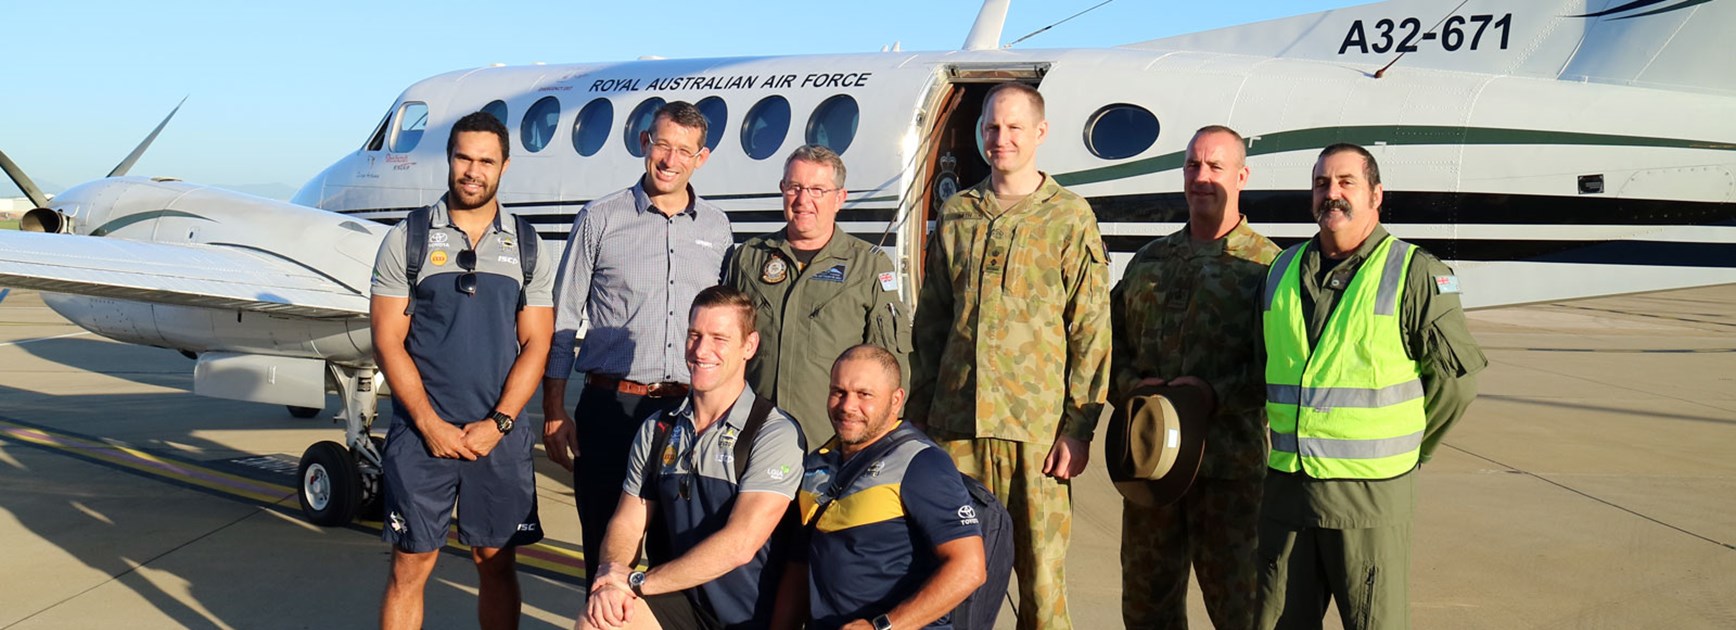 Matt Bowen, Justin O’Neill, Brent Tate and Cowboys CEO Greg Tonner with members of the Australian Air Force.